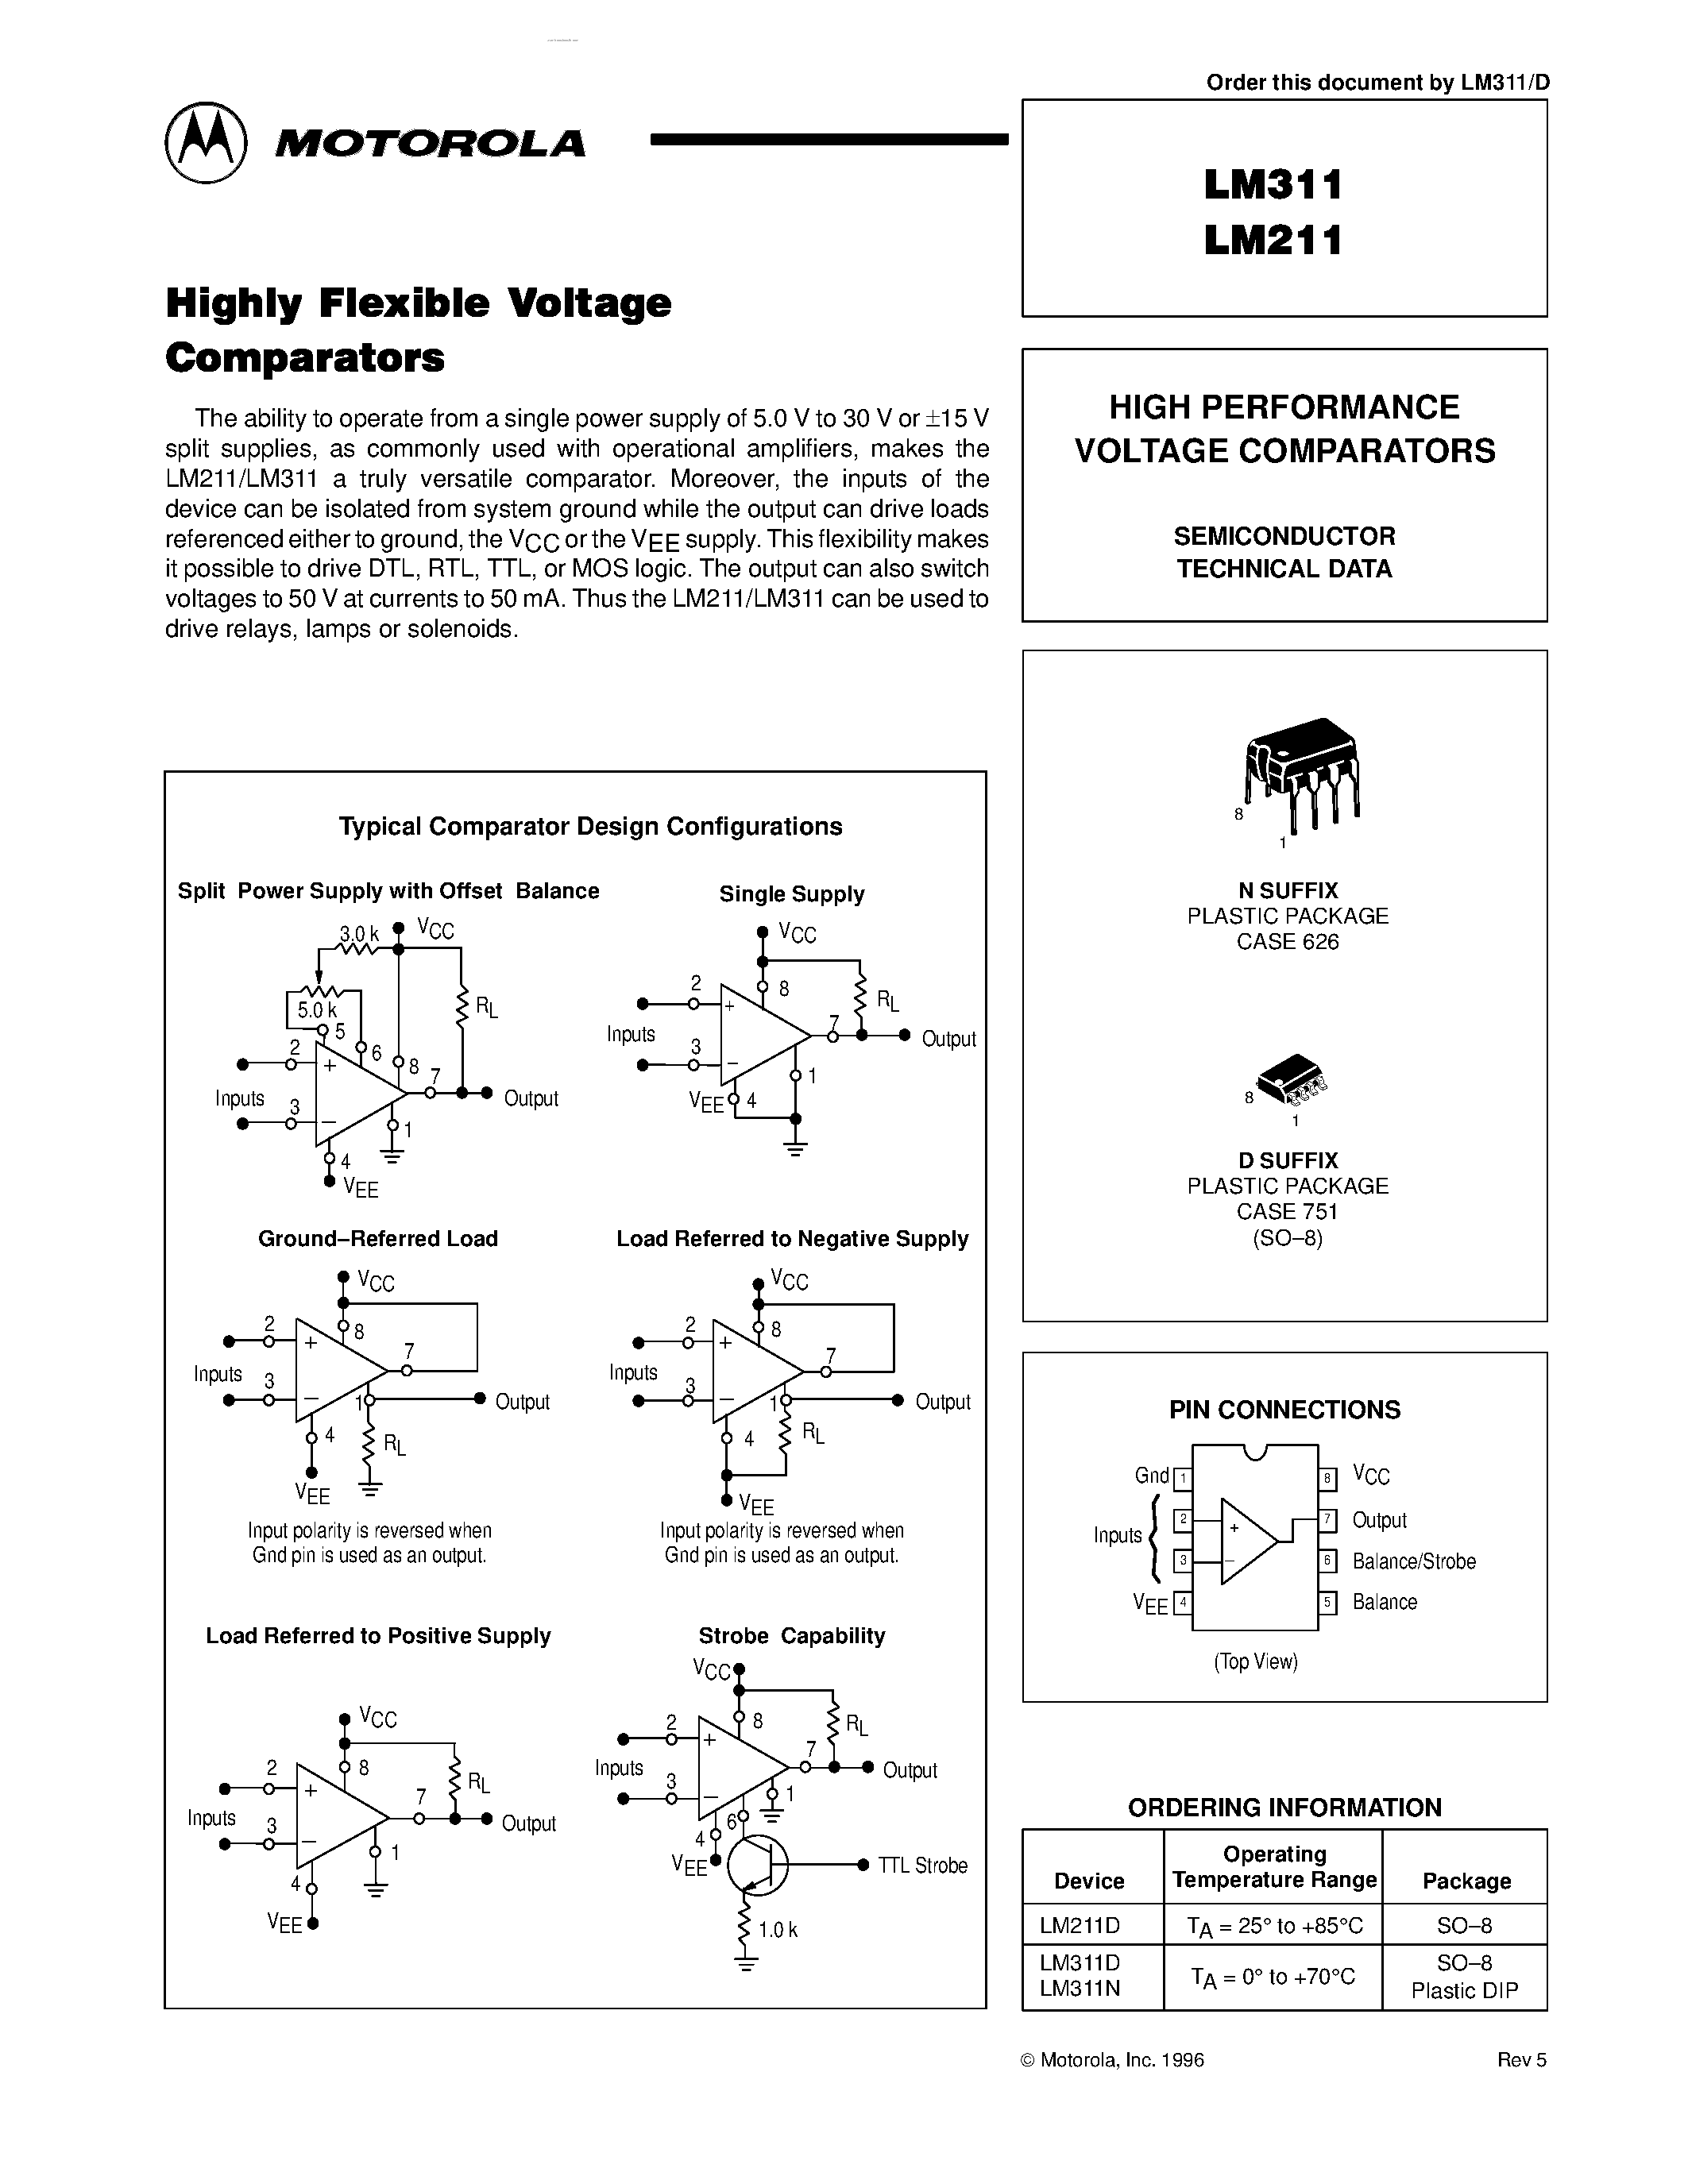 Datasheet LM311 - HIGH PERFORMANCE VOLTAGE COMPARATORS page 1